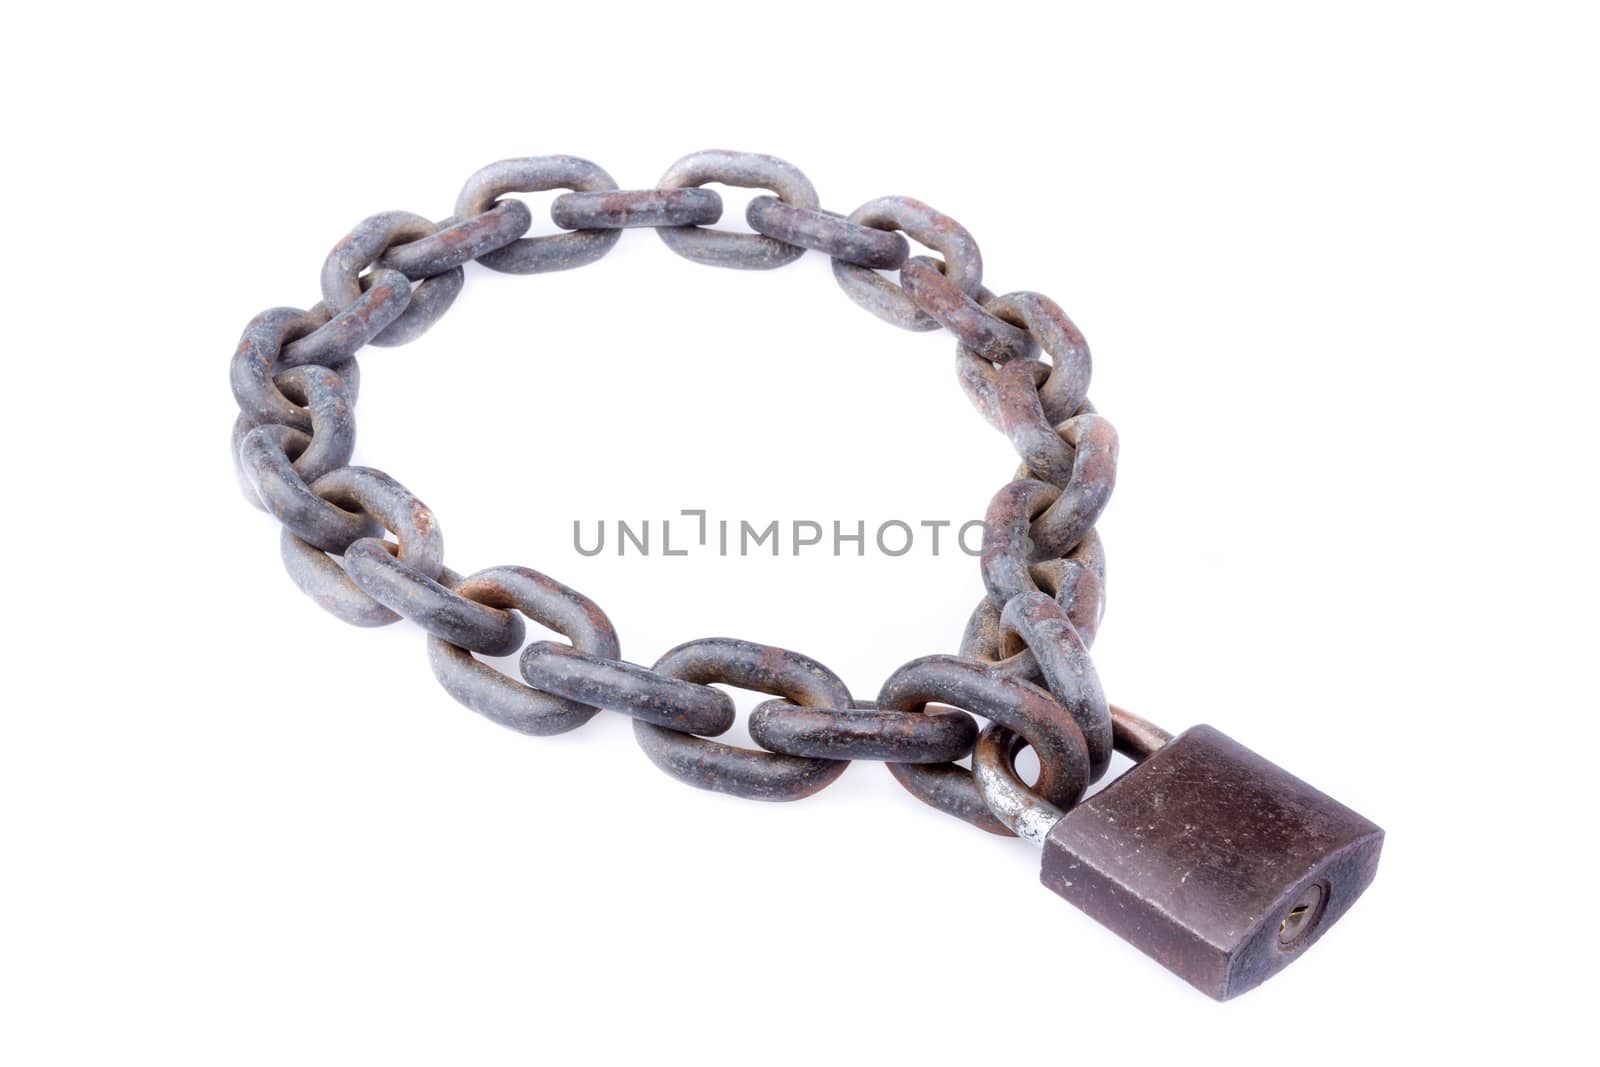 chain and padlock on white background